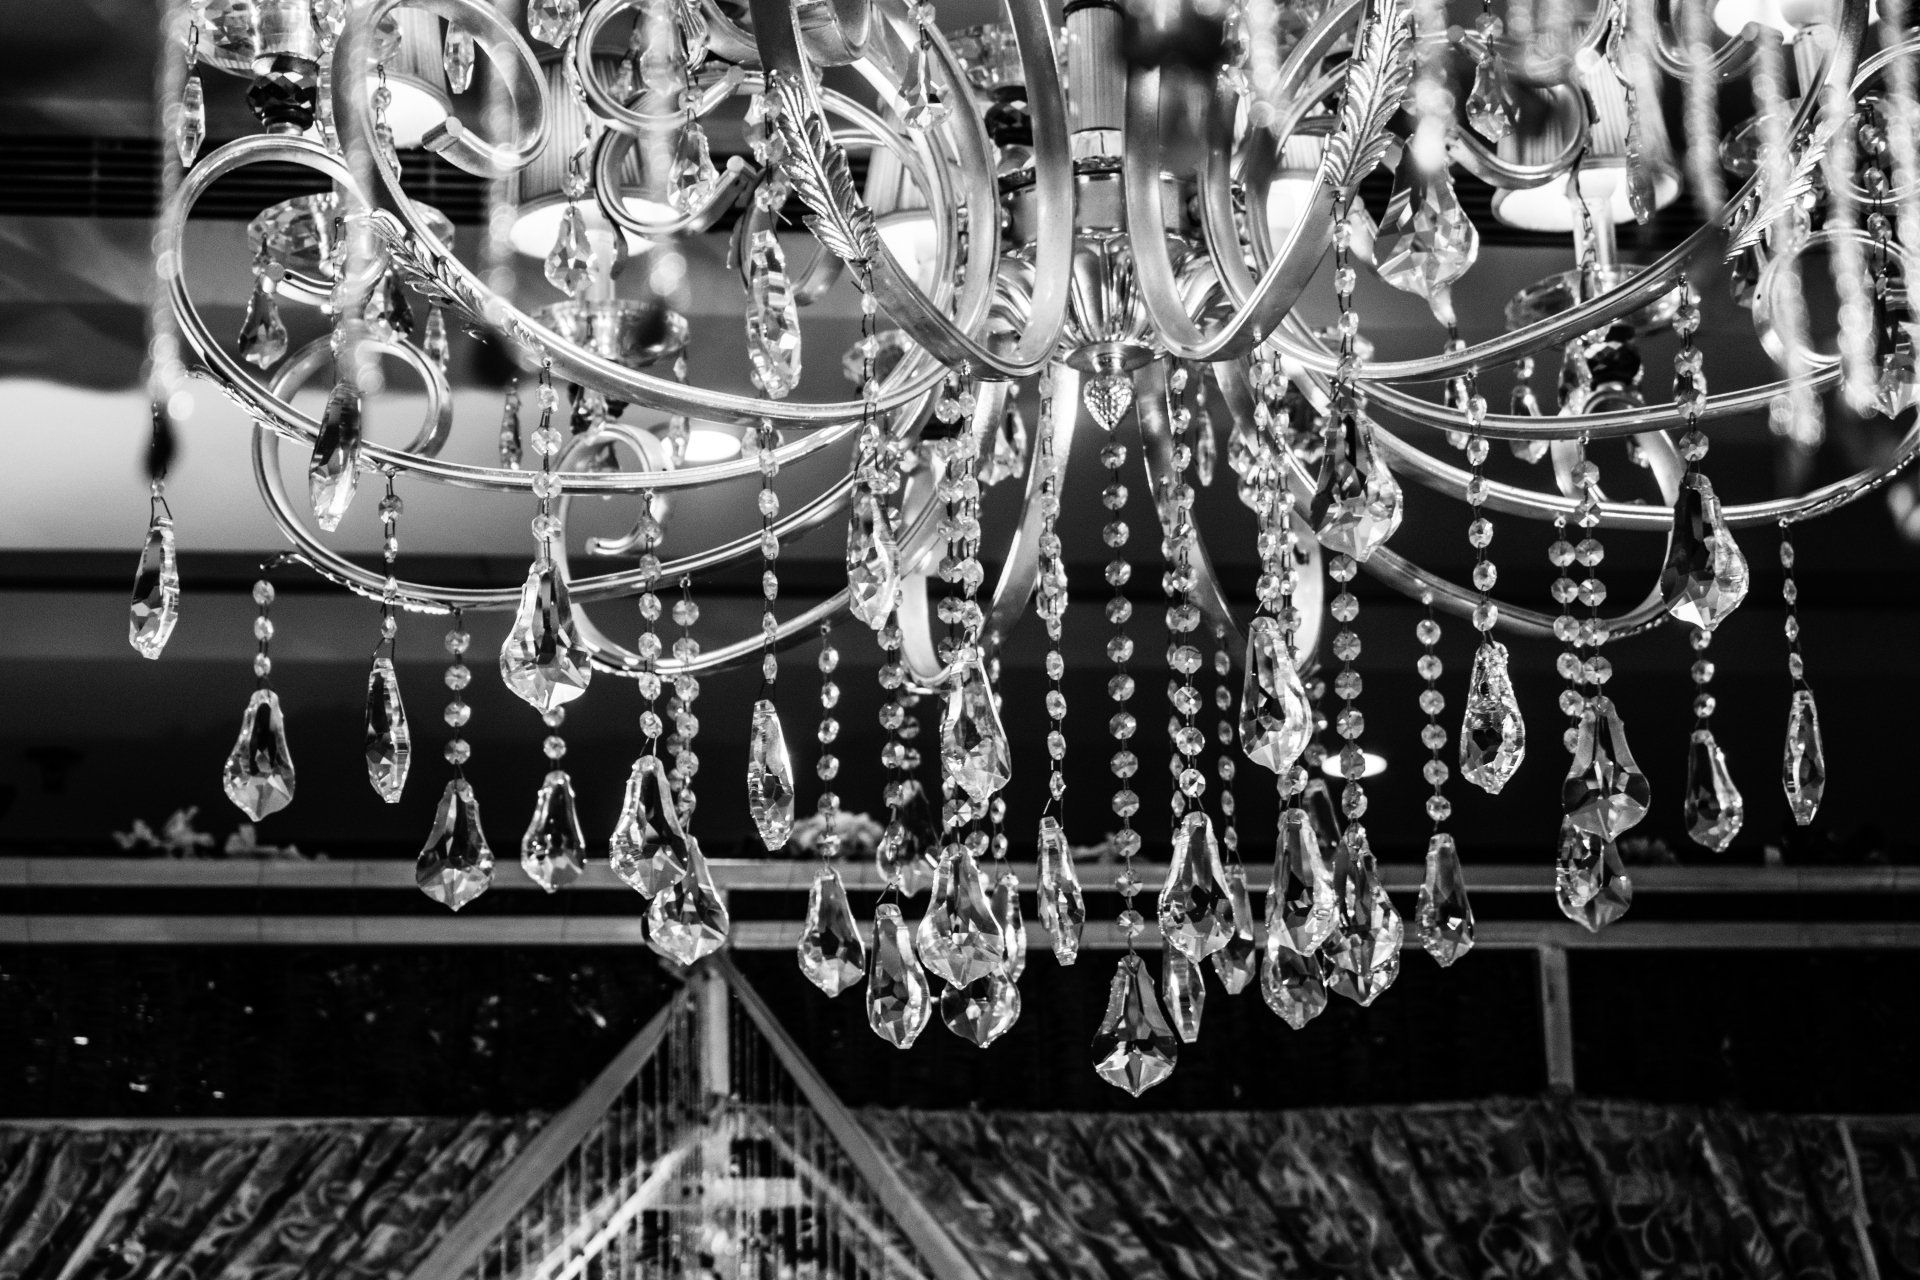 An ornate chandelier with hanging crystals.